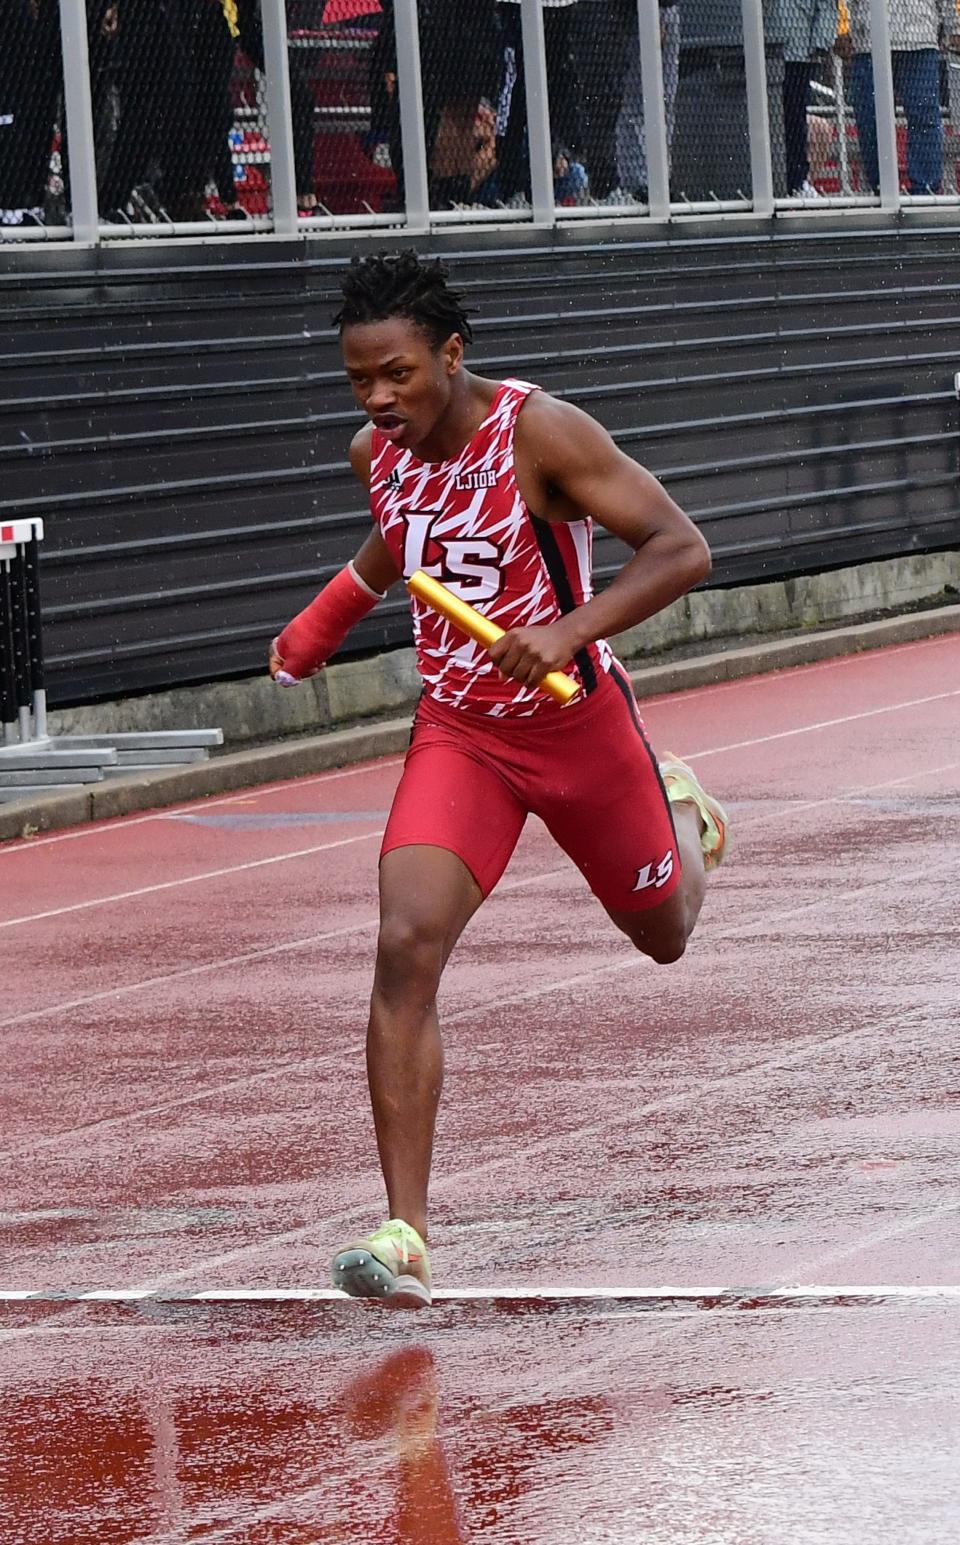 Koy Beasley of La Salle is one of the area's top returning sprinters.